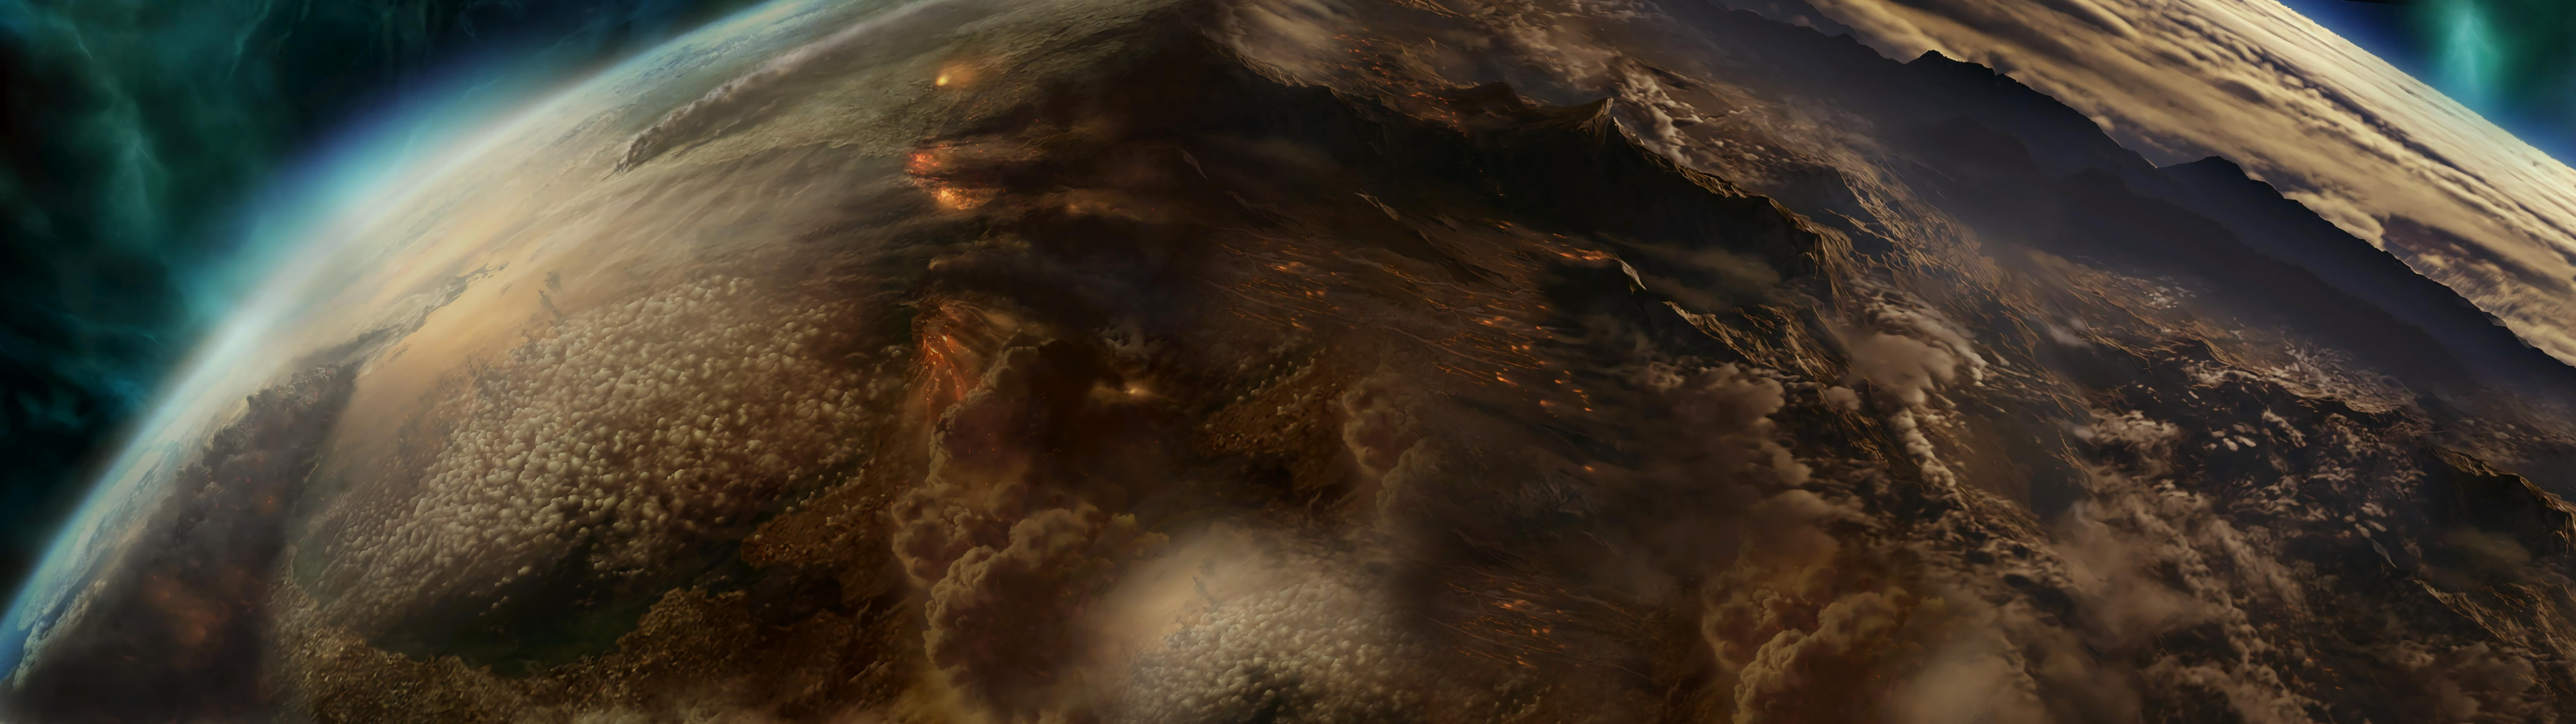 Halo: Reach double monitor wallpaper No. 3 time featuring the planet itself [7680x2160]